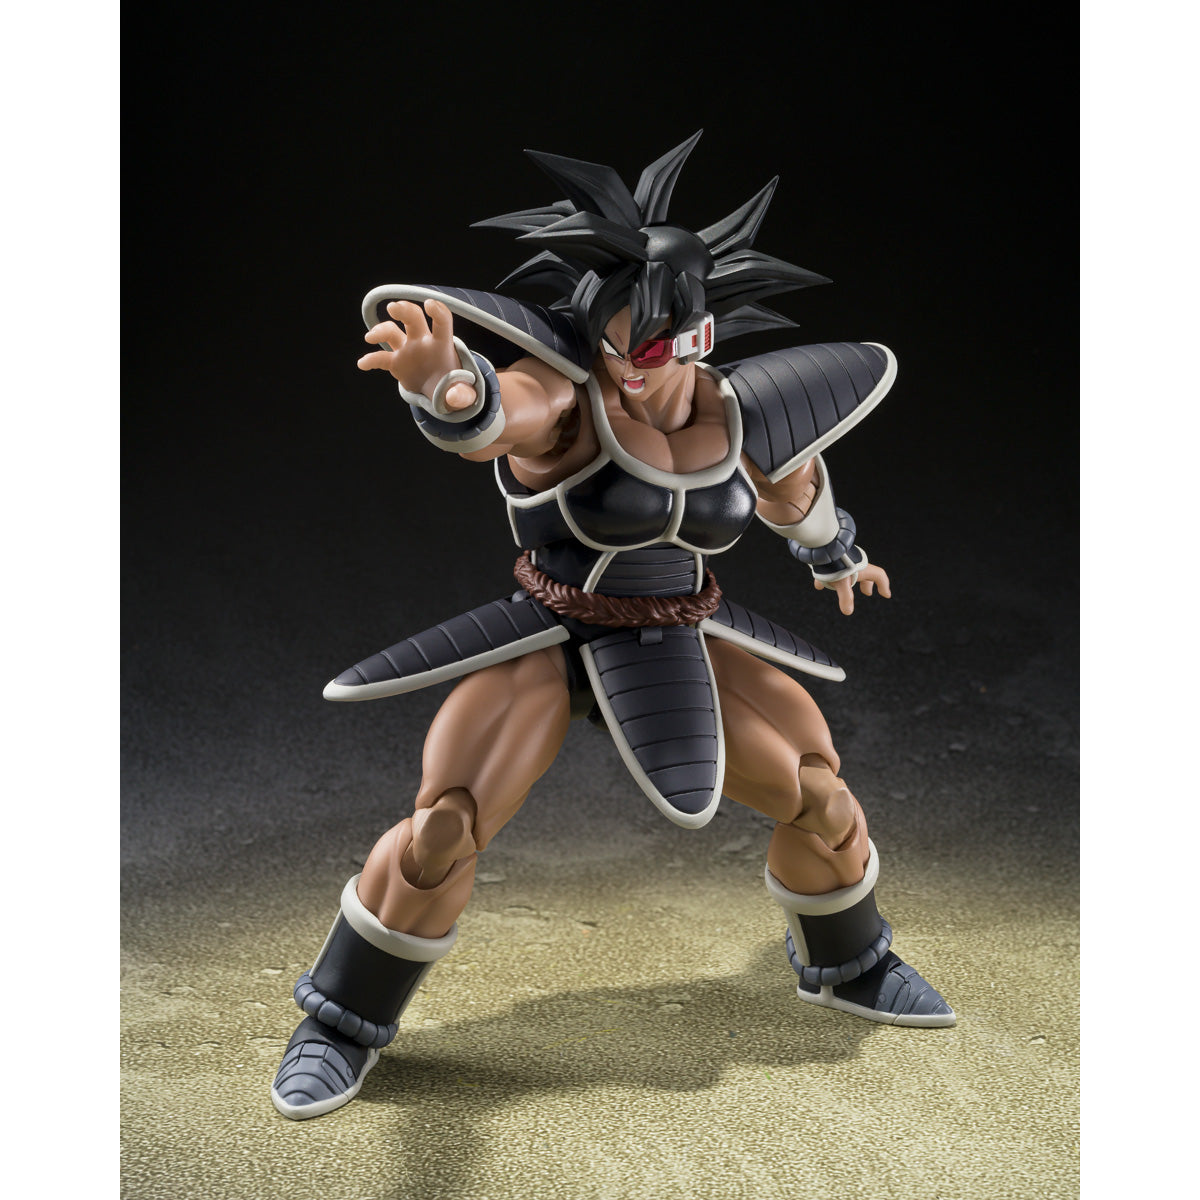 
                  
                    An articulated 5.7-inch S.H.Figuarts Turles action figure from Dragon Ball Z: The Tree of Might. The figure is detailed with various accessories including a hand holding the Tree of Might fruit, cape, crossed arms, and an energy attack effect.
                  
                